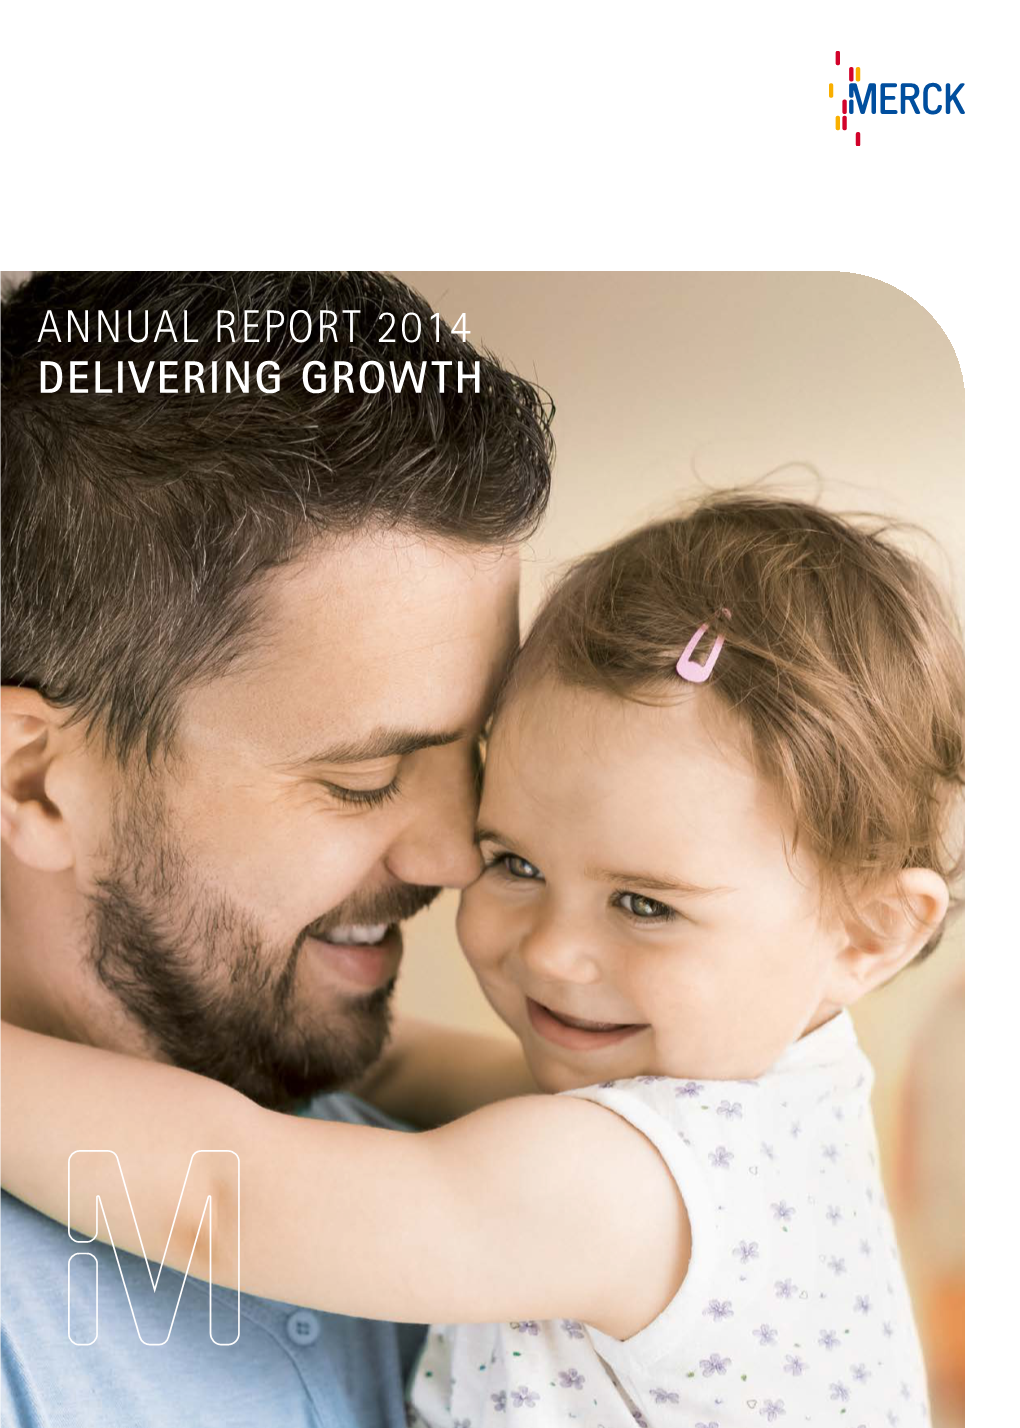 Annual Report 2014 Delivering Growth